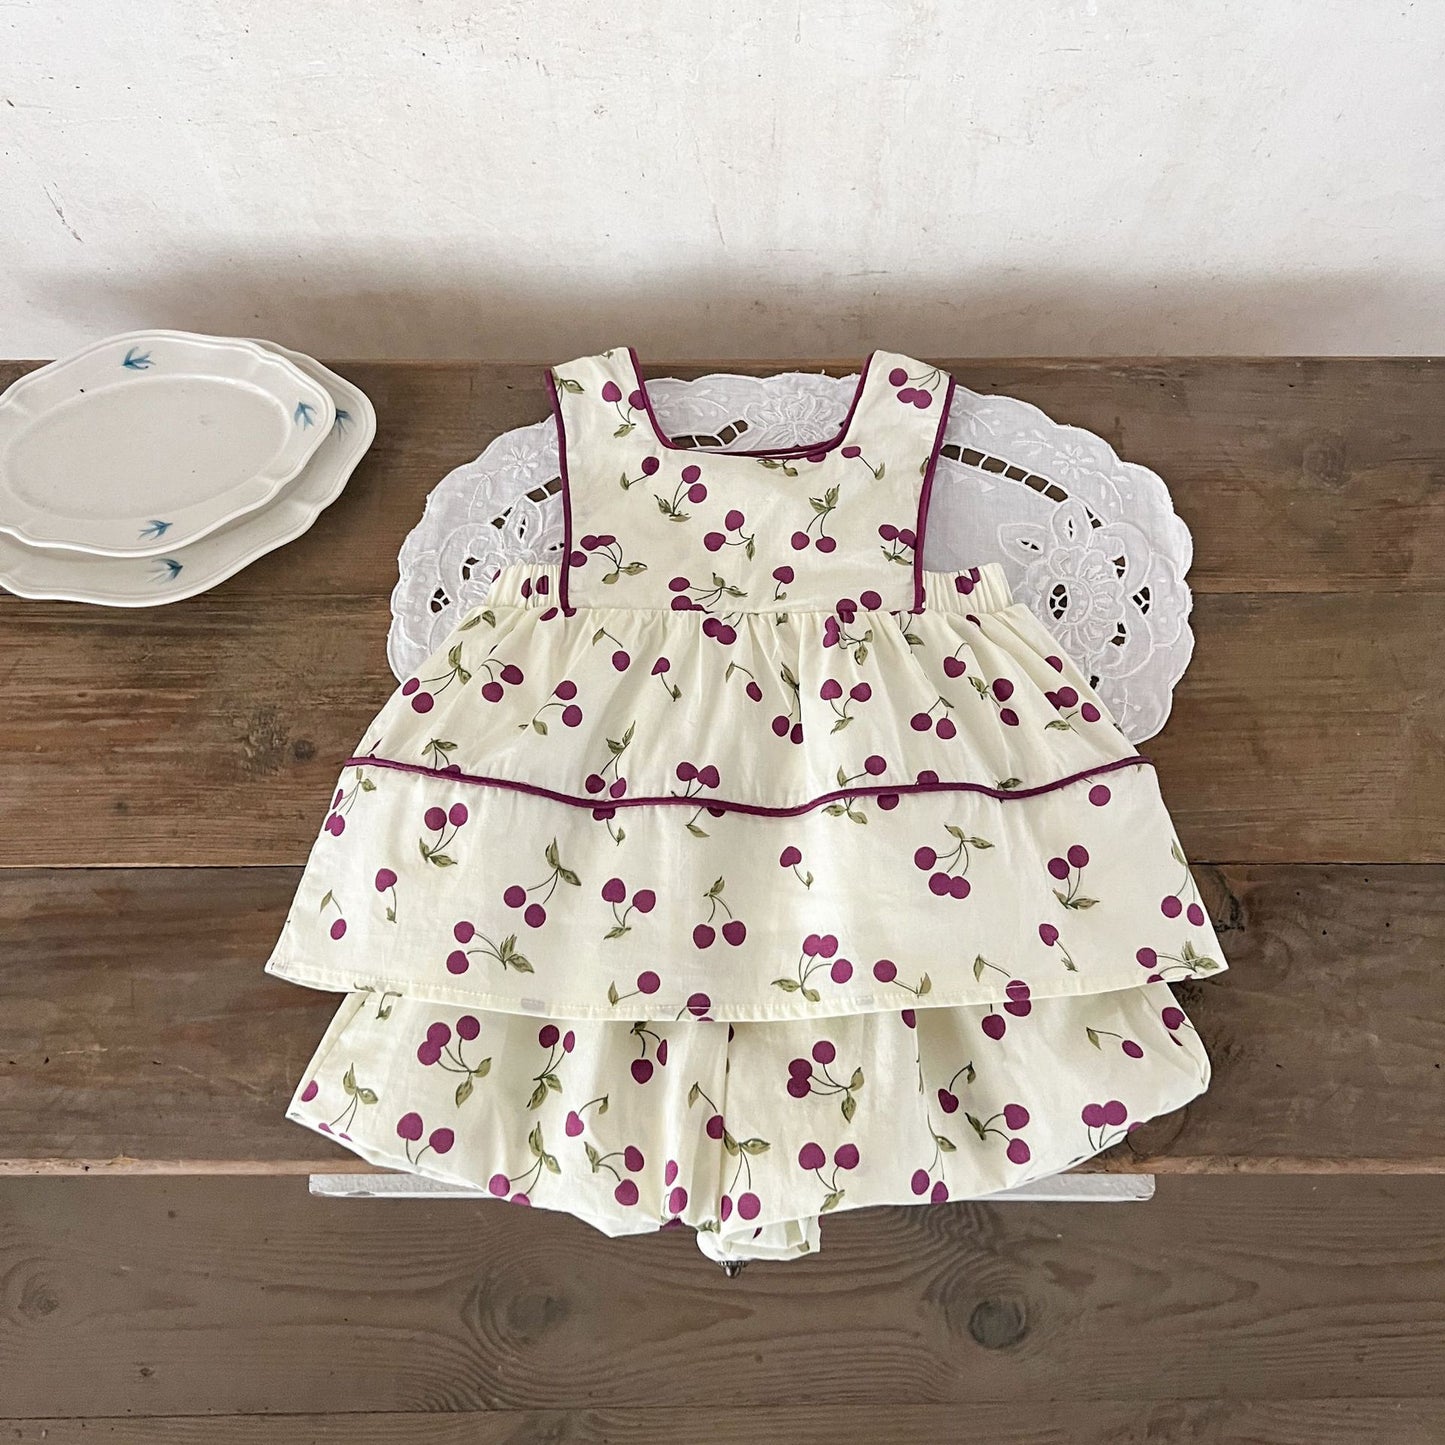 Summer Hot Selling Baby Girls Sleeveless Sweet Cherry Print Dress And Bloomers Clothing Set